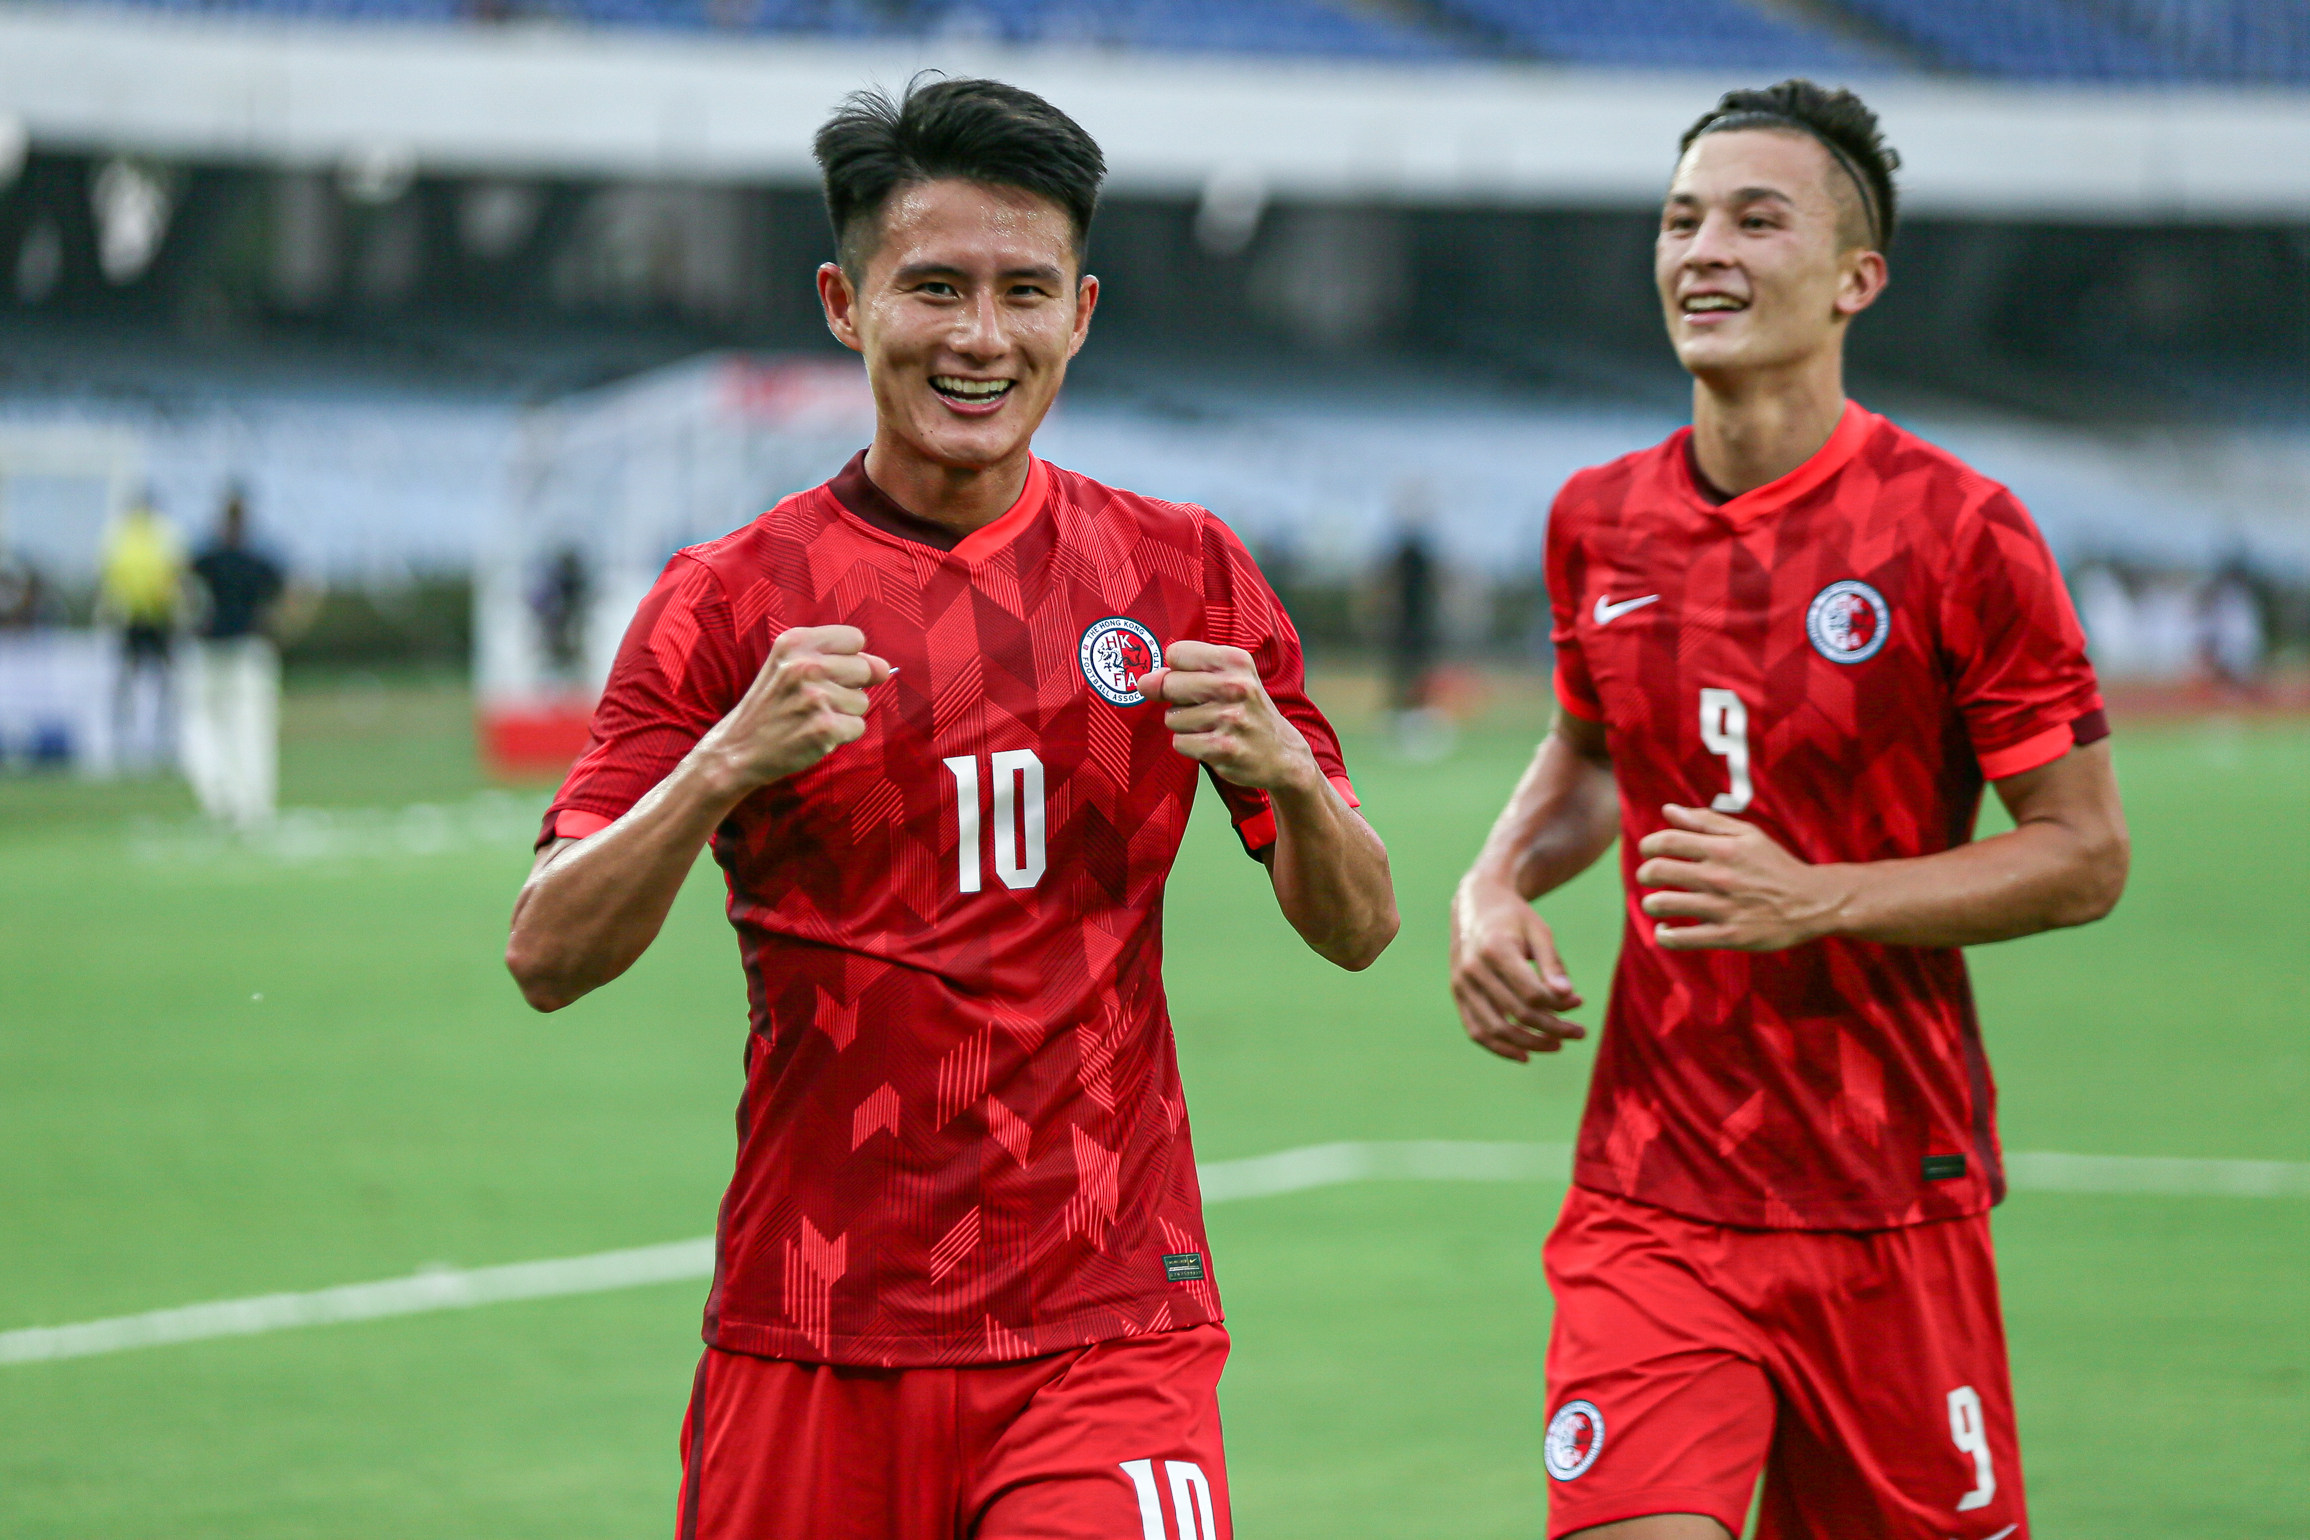 Wong Wai (left) celebrates after putting Hong Kong ahead in the first half against Afghanistan in their Asian Cup qualifier. Hong Kong have qualified for the main tournament for the first time in 54 years. Photo: HKFA